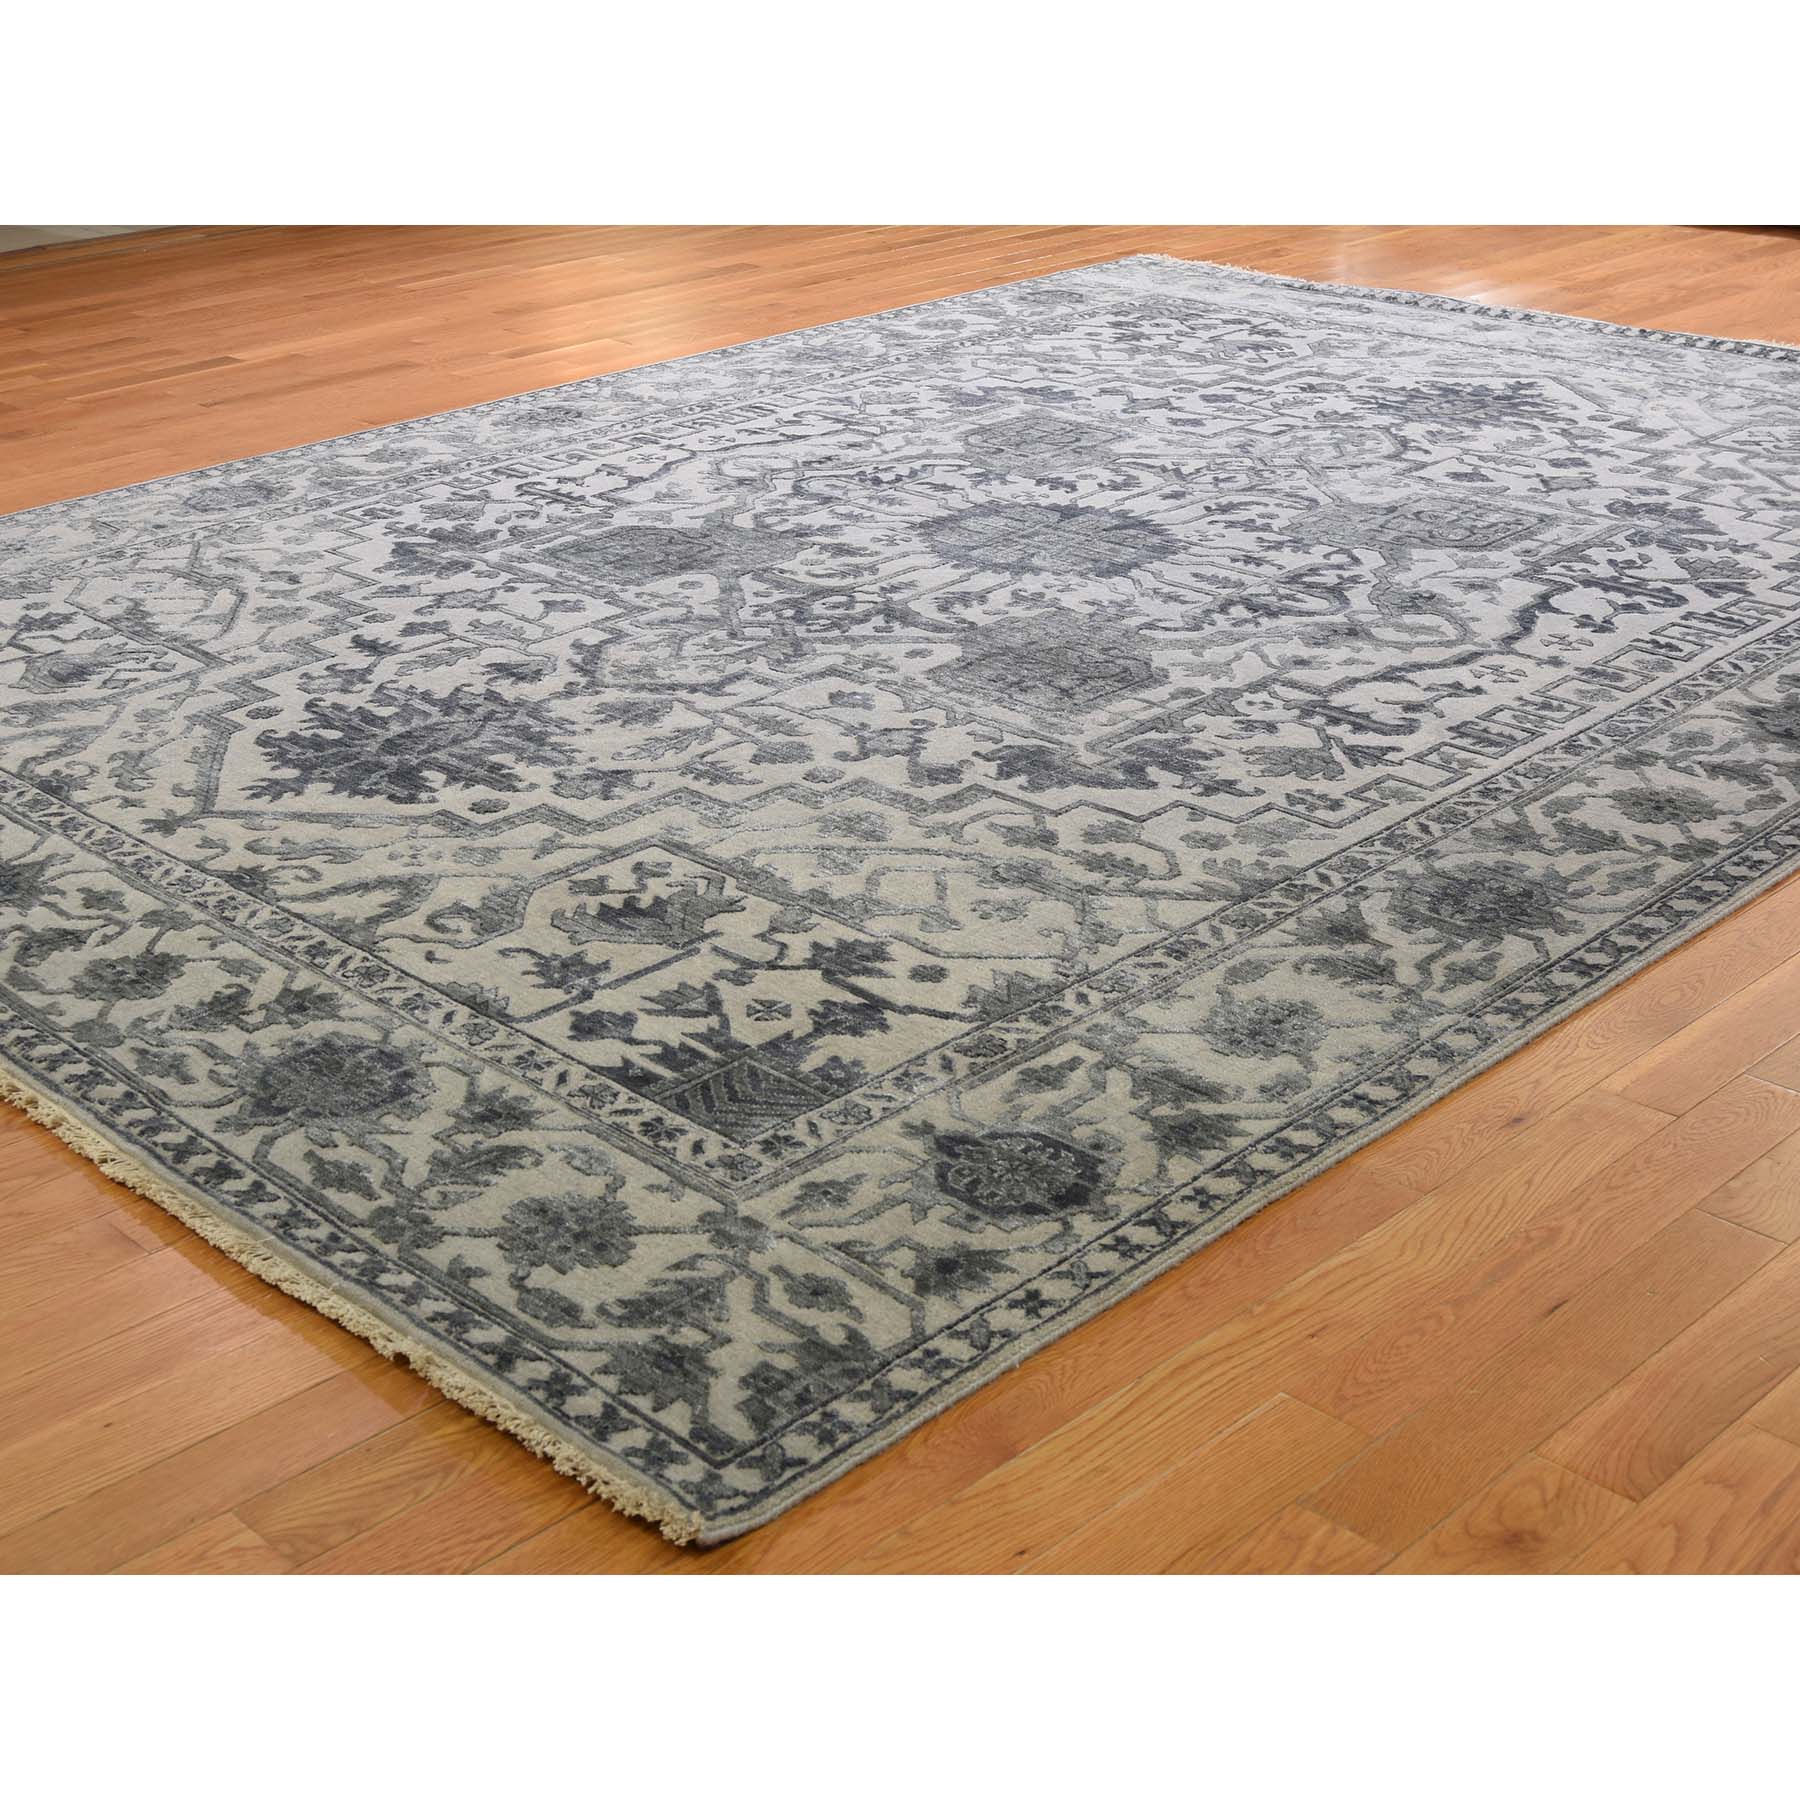 9-x12-1  Silver Heriz Design Wool And Silk Hi-lo Pile Hand-Knotted Oriental Rug 